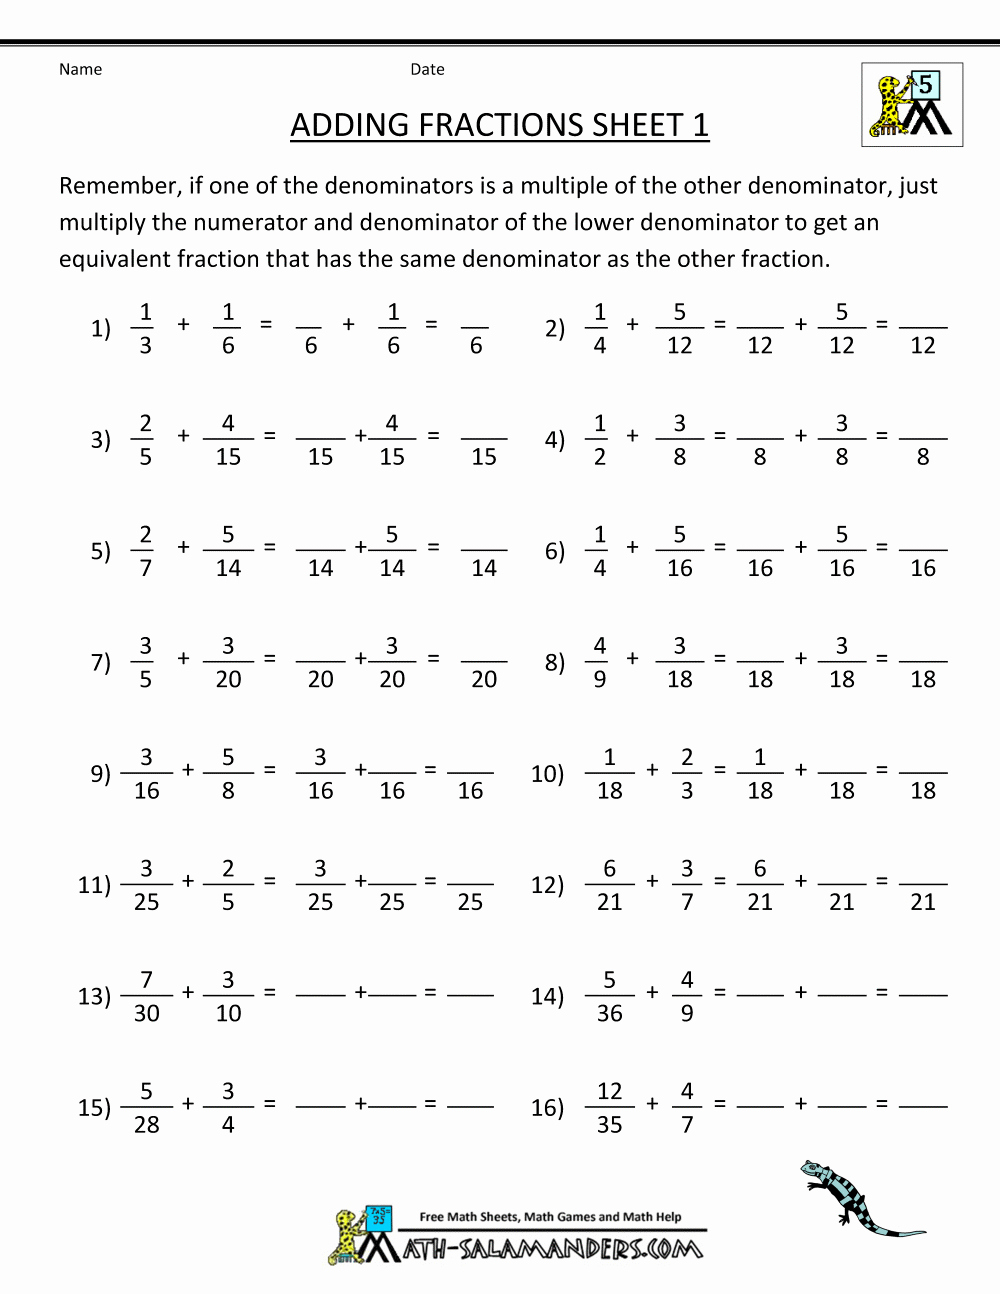 Adding Fractions Worksheets Unique Adding Fractions with Unlike Denominators Worksheets 5th